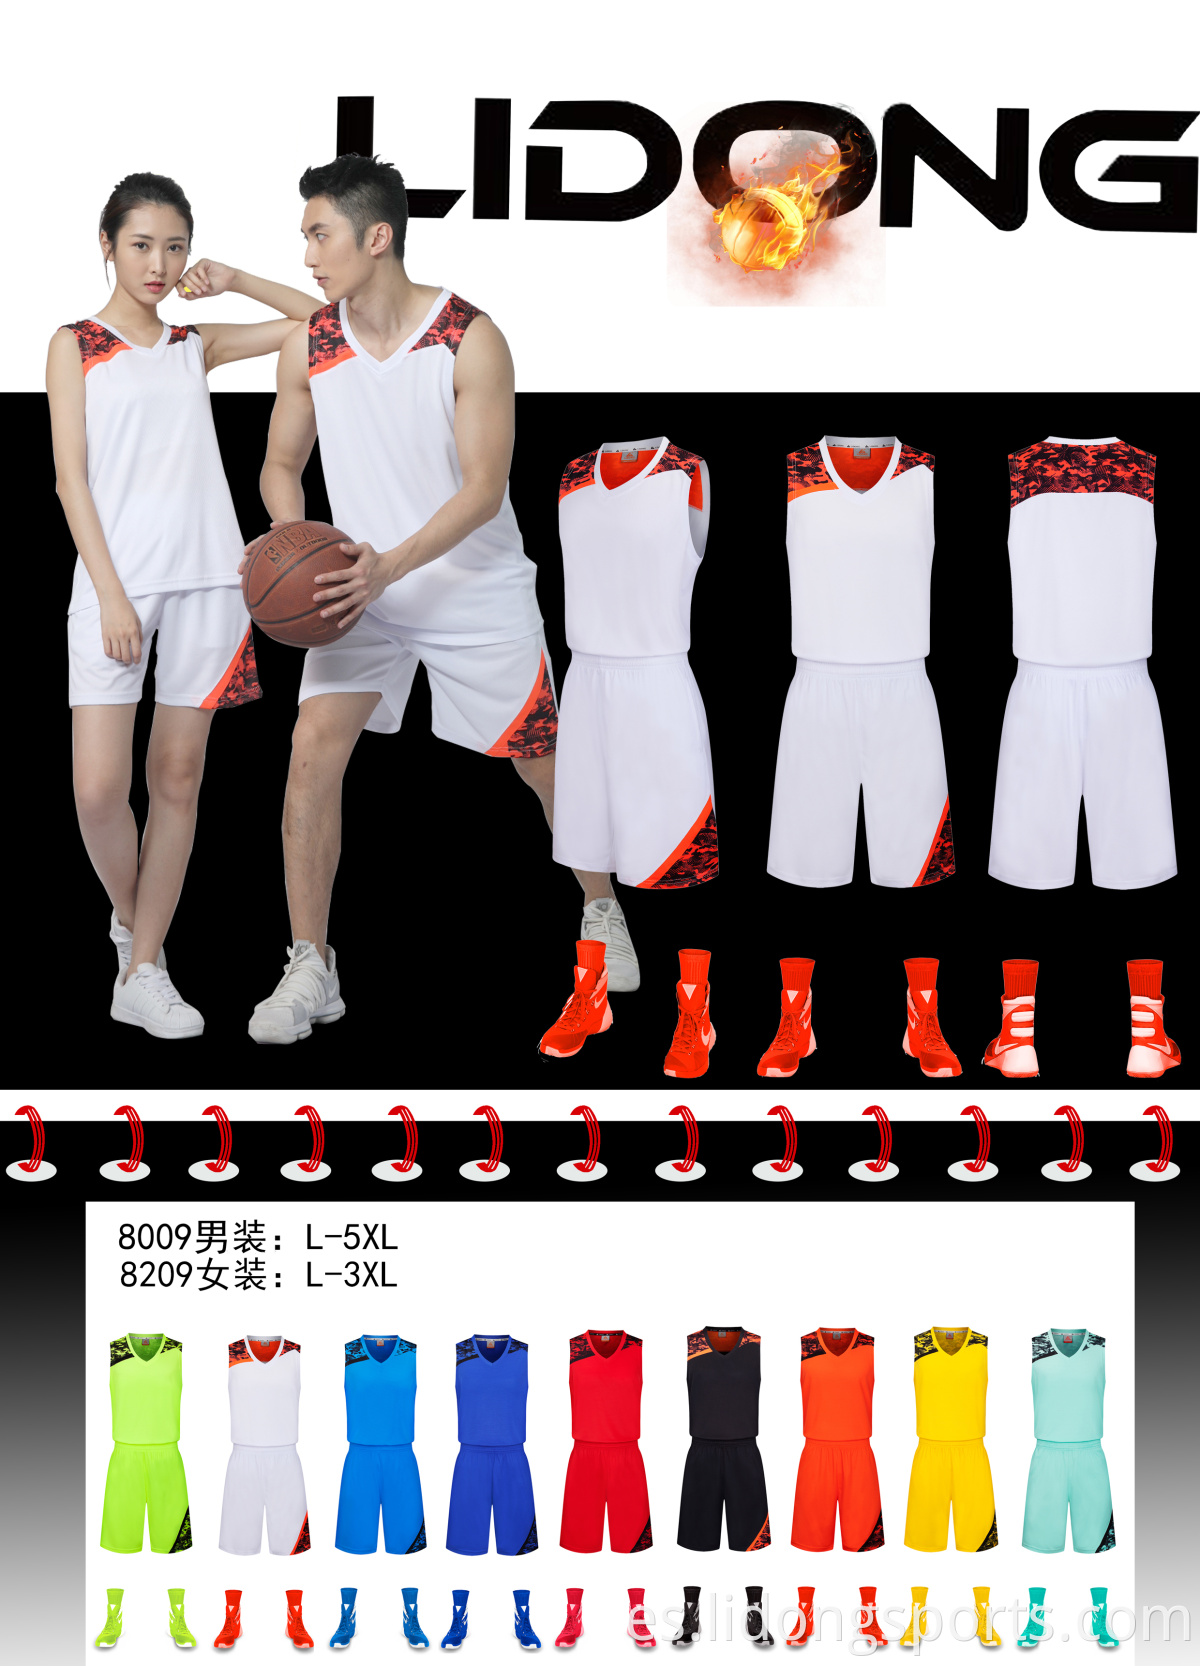 100% Polyester Hot Sale Fashion Latest Basketball Blank Jersey Tank Toques para hombres